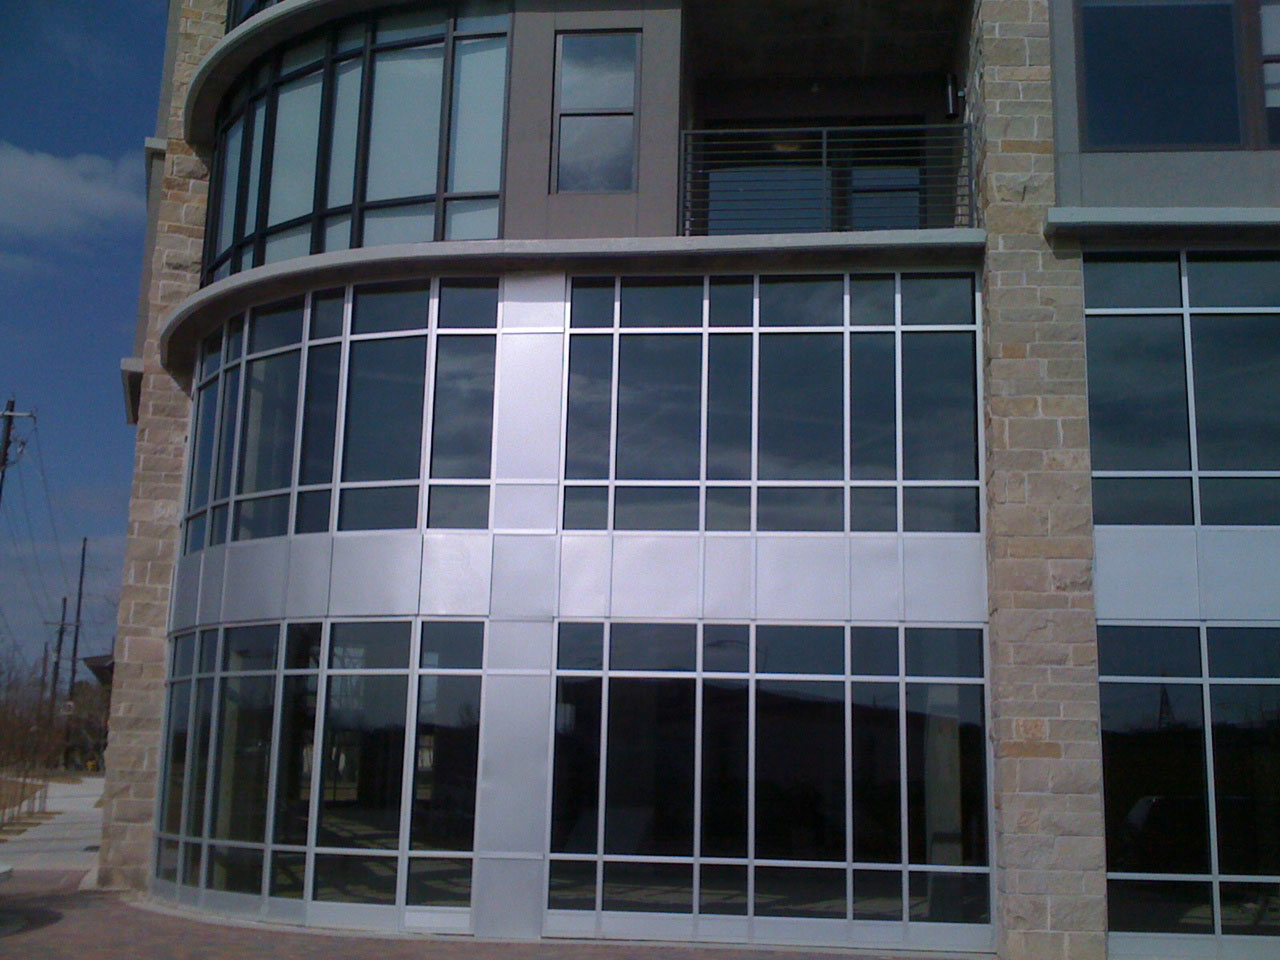 Building with architectural glass exterior windows